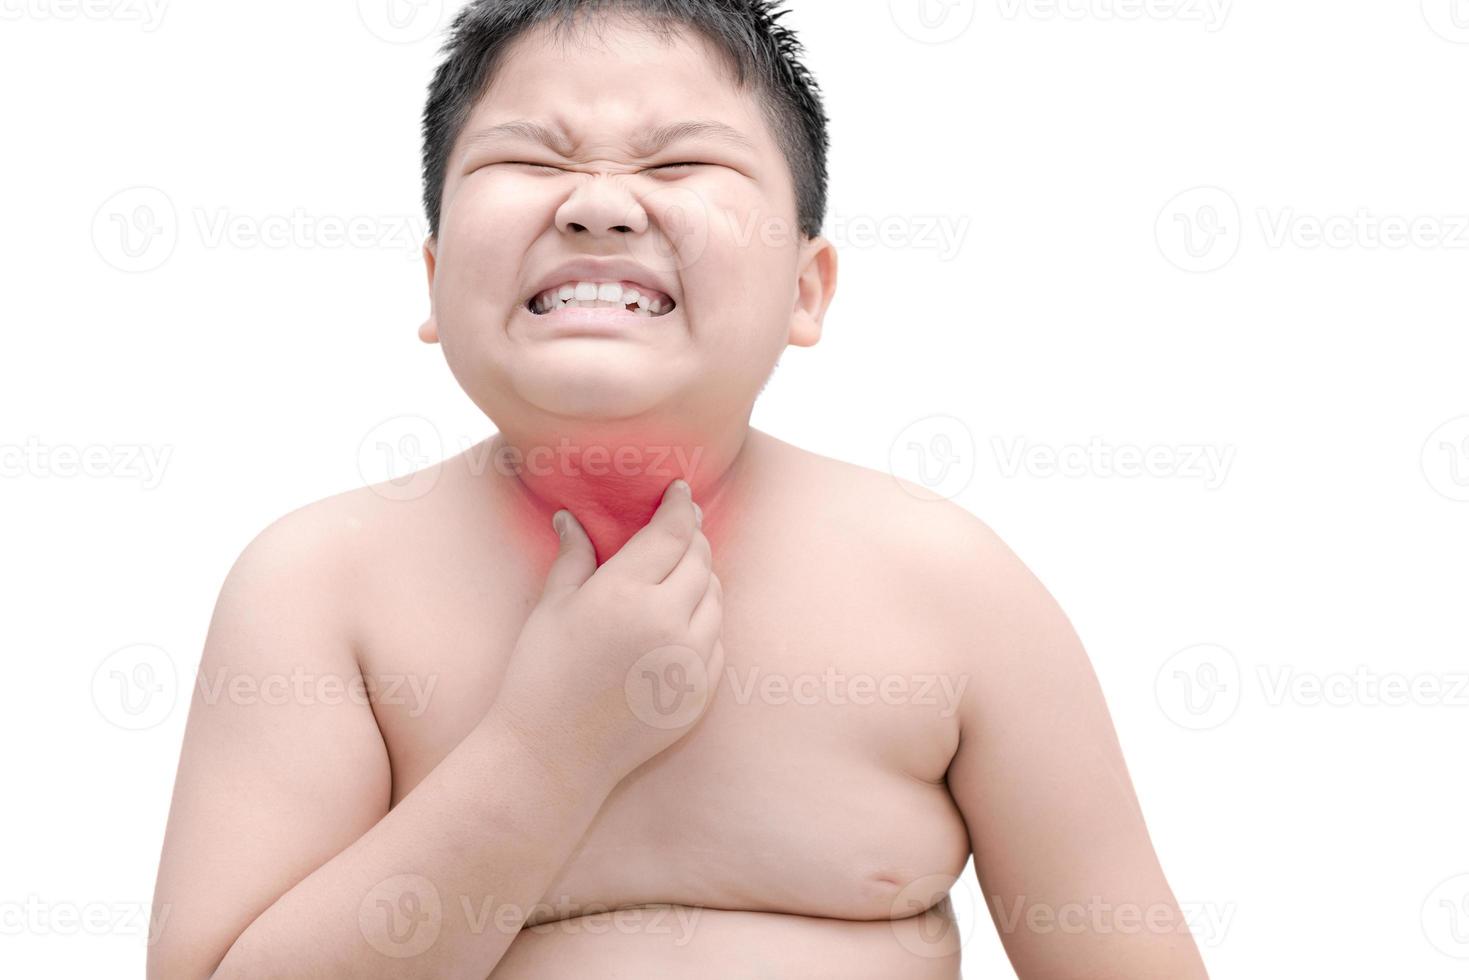 Obese fat boy scratch the itch with hand, throat irritation, isolated photo